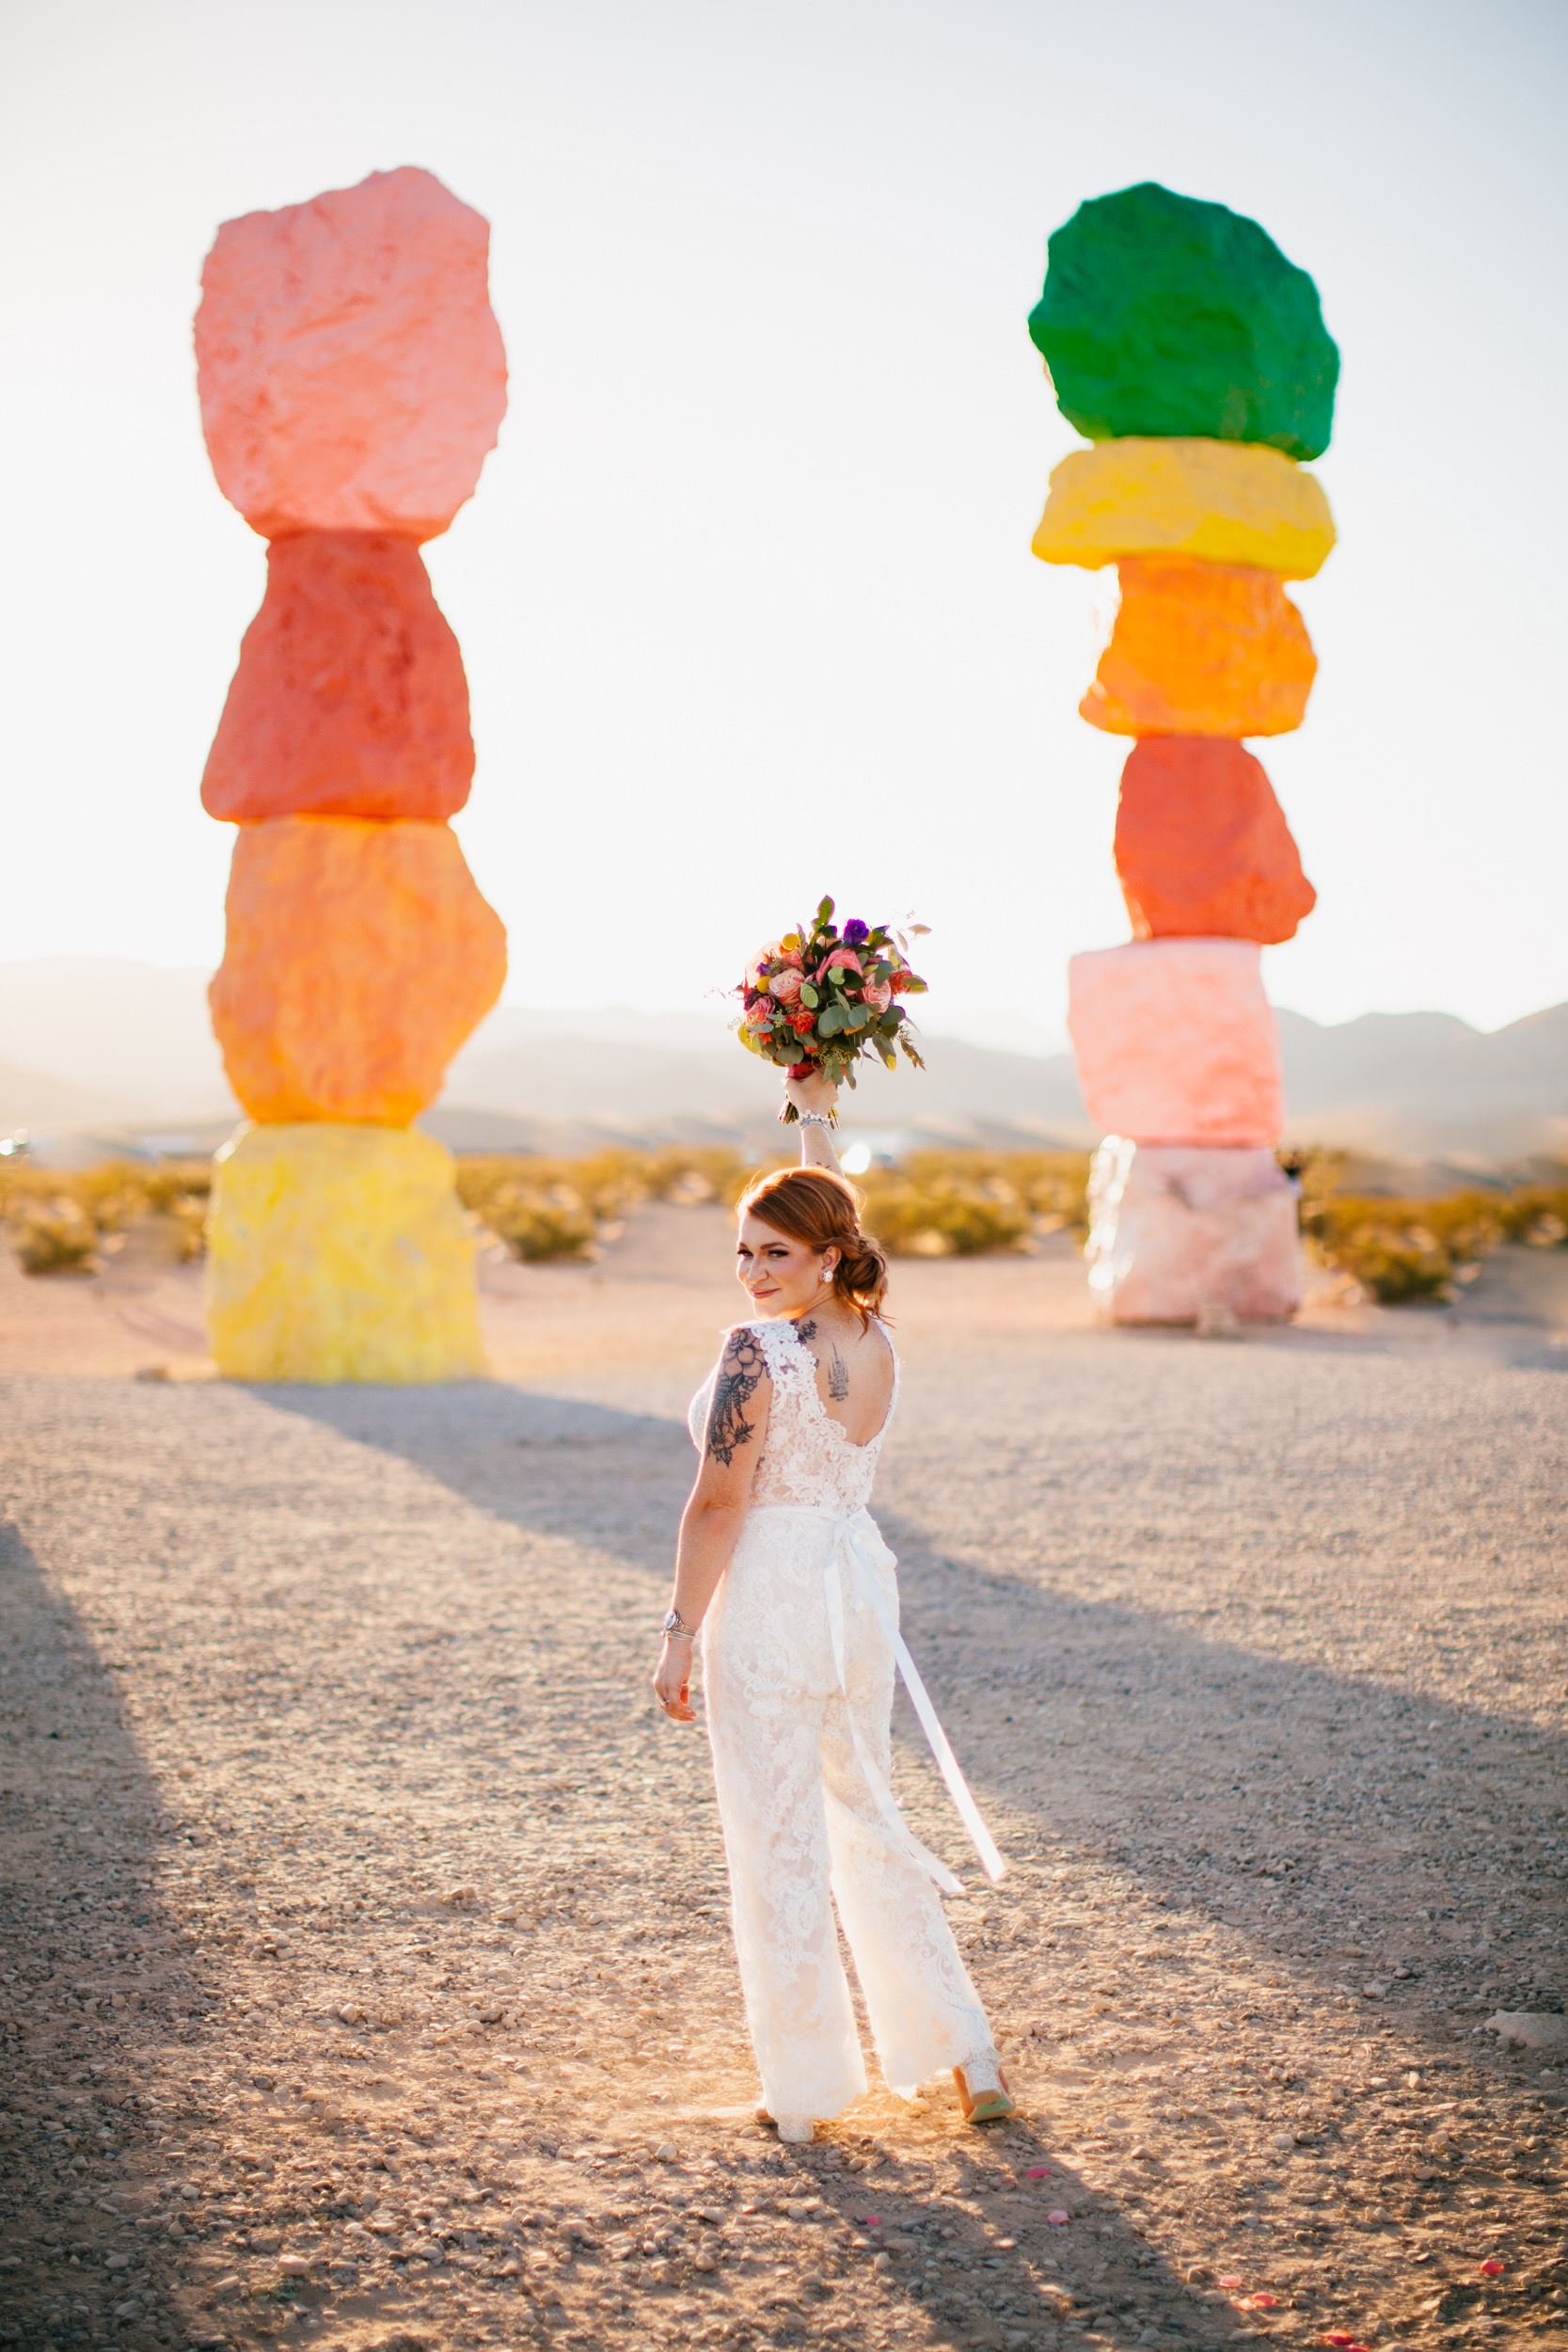 Bride wearing white lace jumpsuit in front of colored rocks.